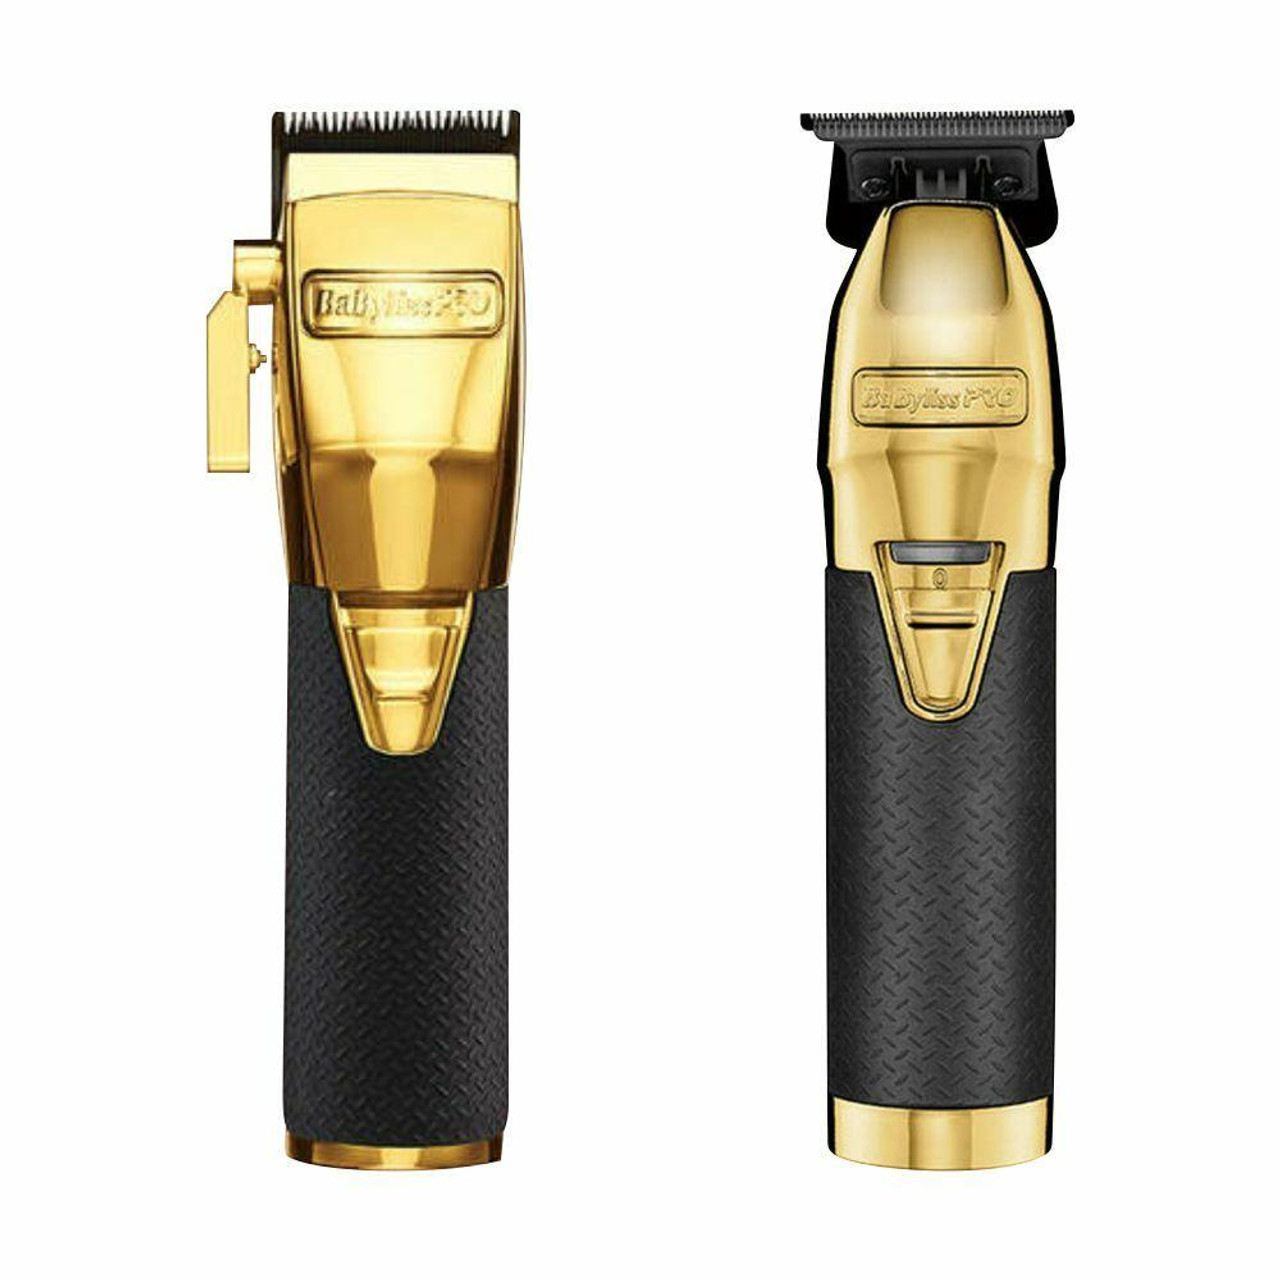 BabylissPro Boost FX Limited Edition Chameleon Clipper and Trimmer